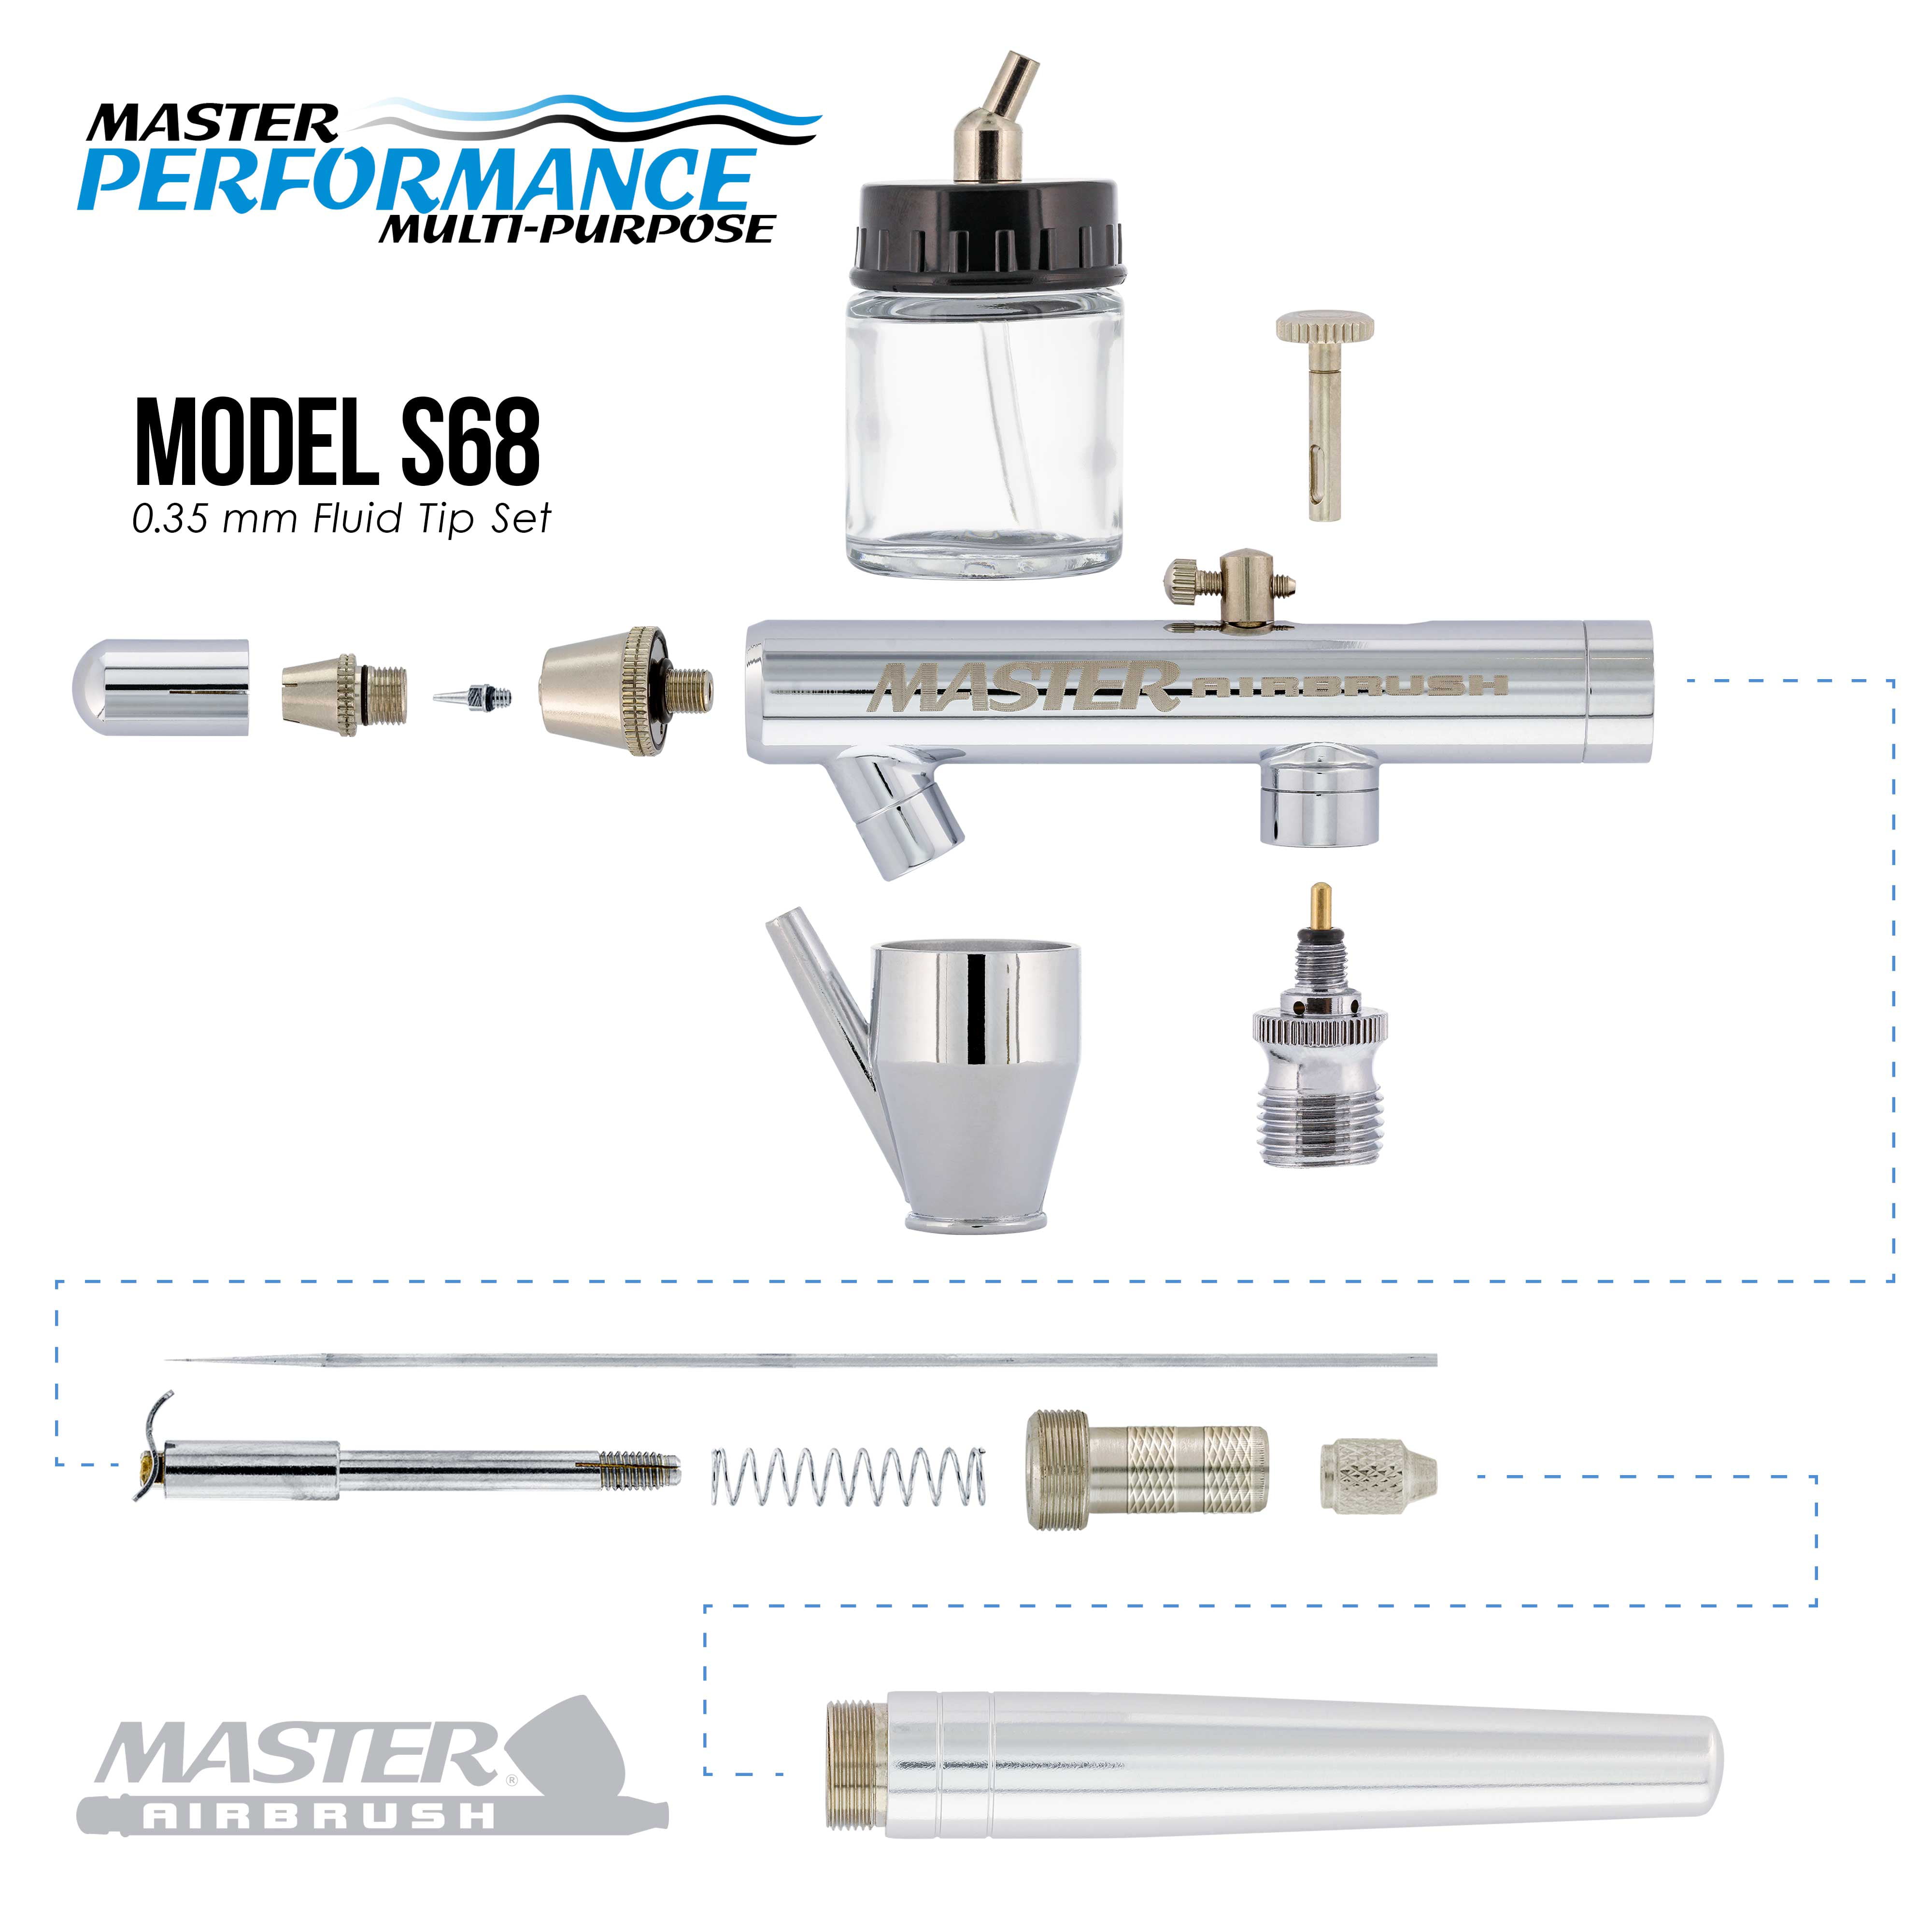 Master Airbrush Multi-Purpose Gold Airbrushing System Kit with Portable  Mini Air Compressor - Gravity Feed Dual-Action Airbrush, Hose,  How-To-Airbrush